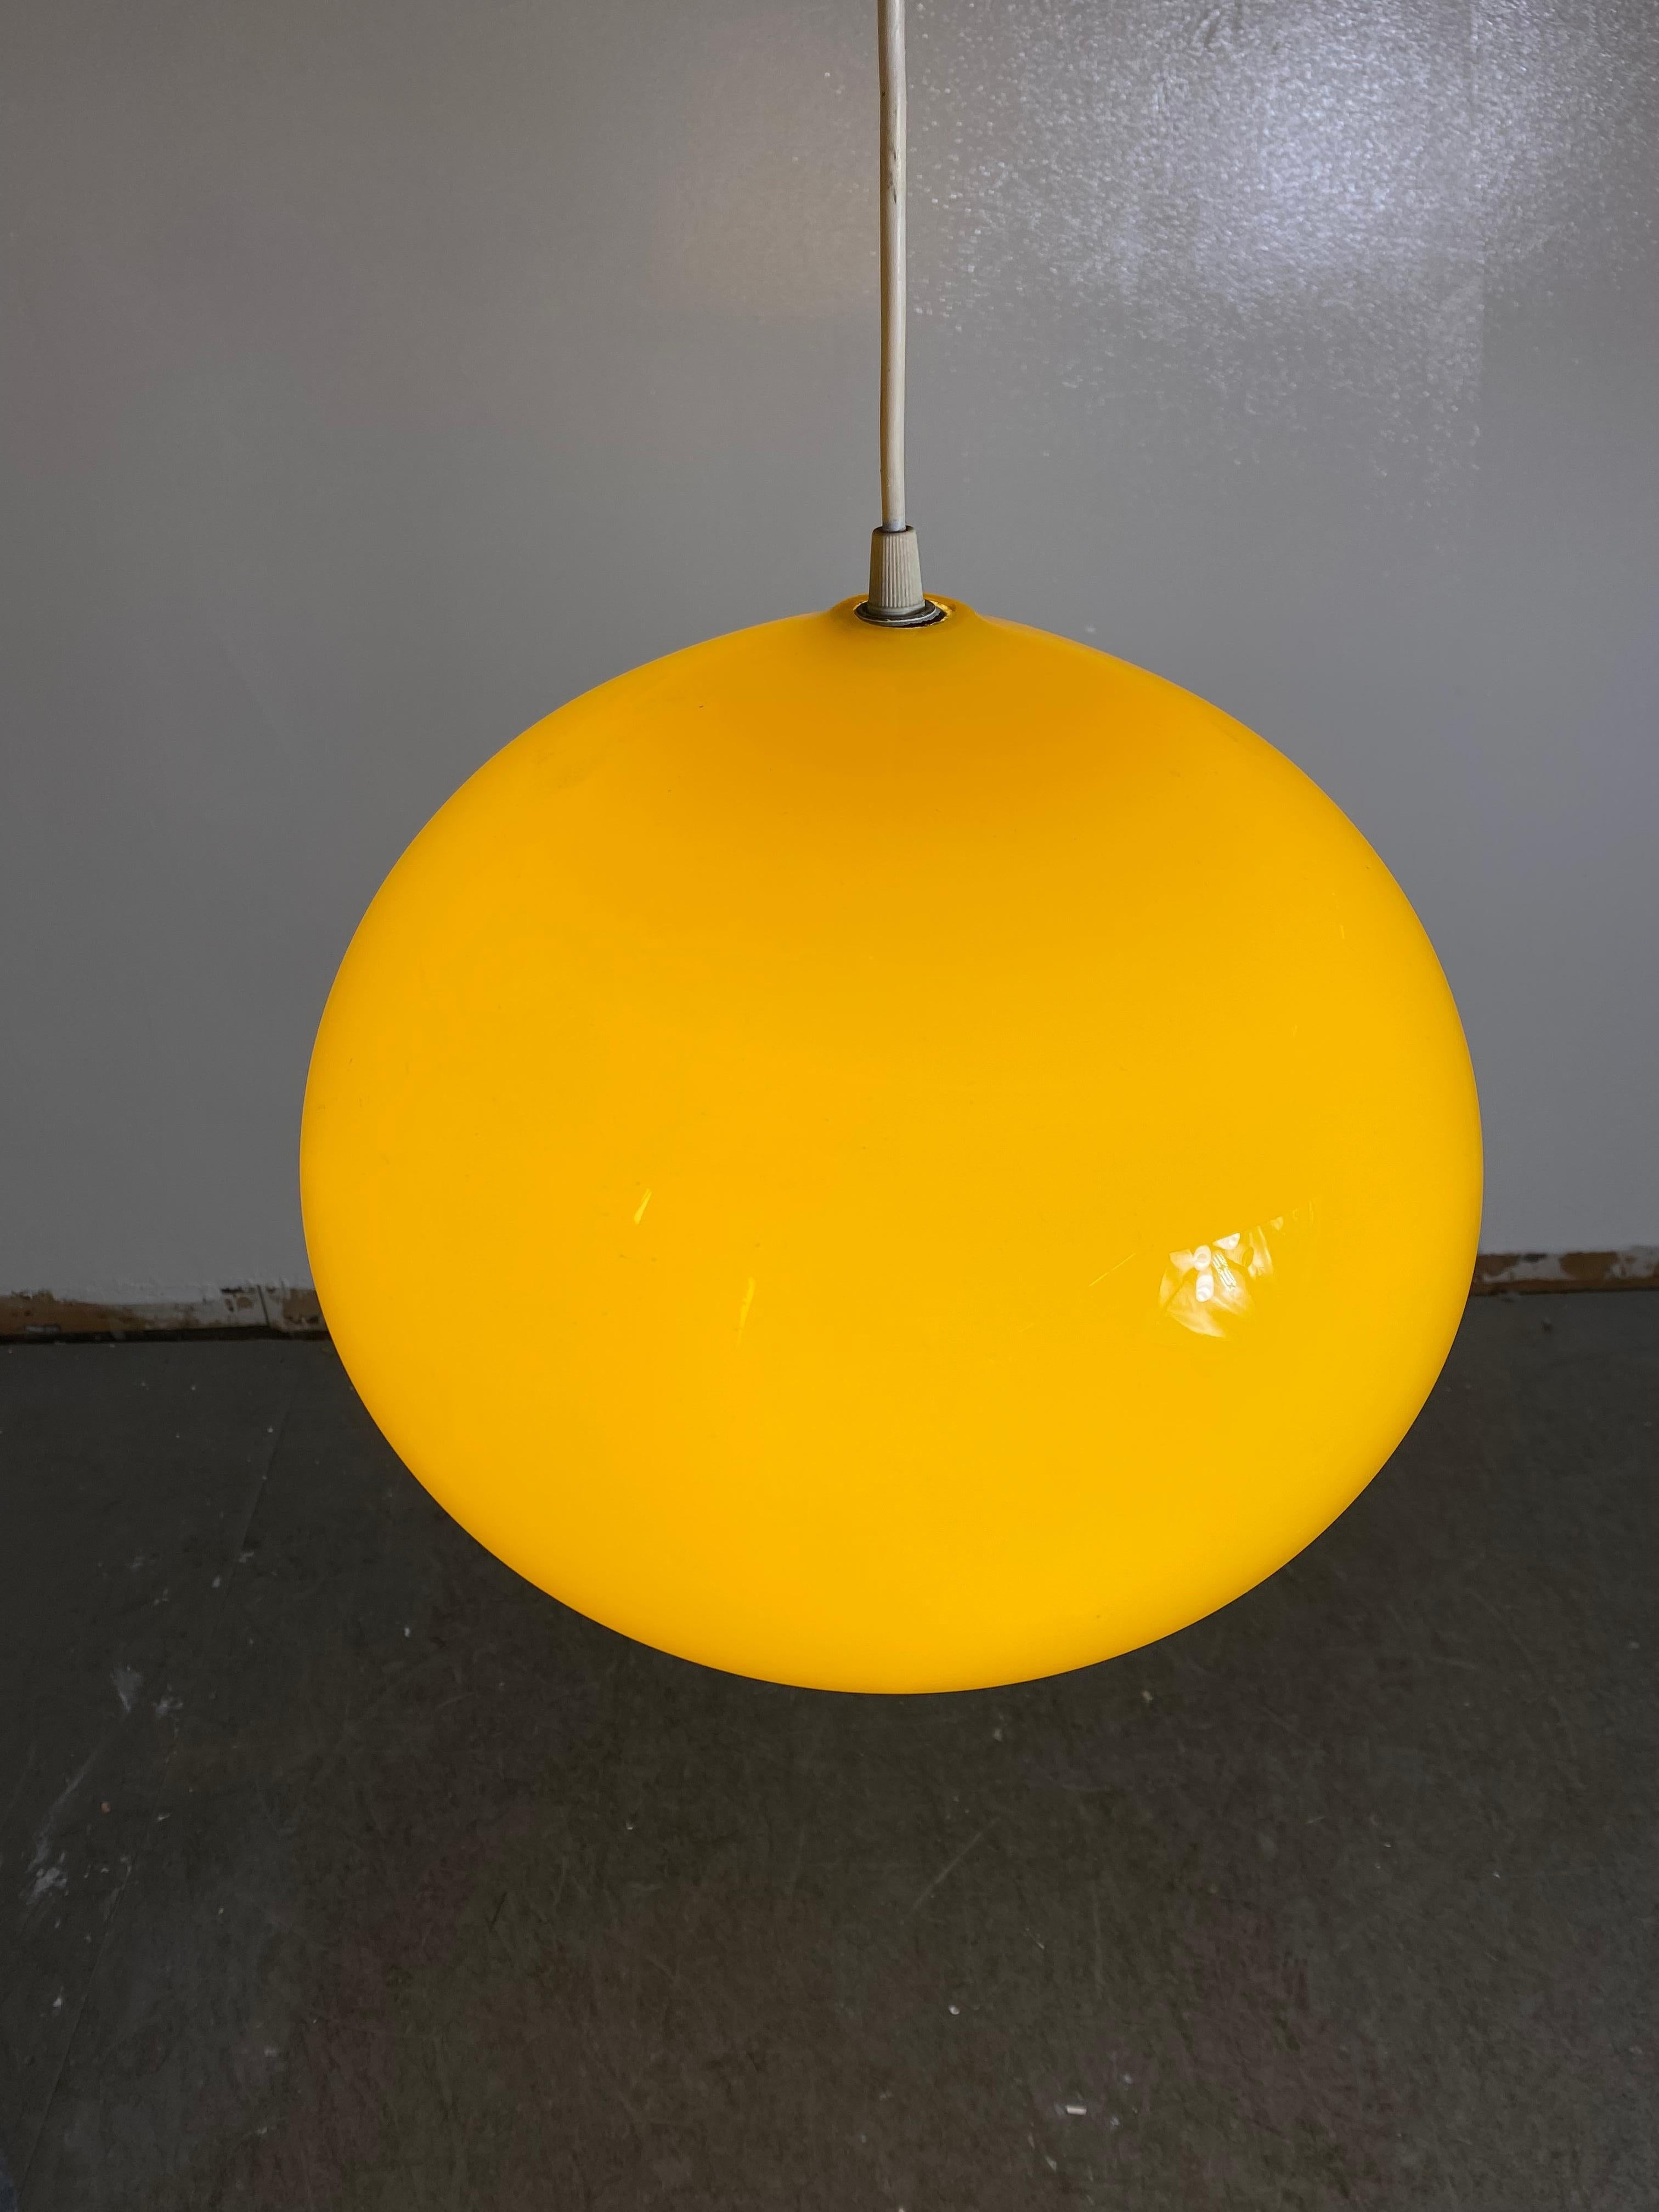 This very beautiful pendant lamp, model 'Cipola' or 'Onion', was designed by Alessandro Pianon for Vistosi in Italy. The yellow 